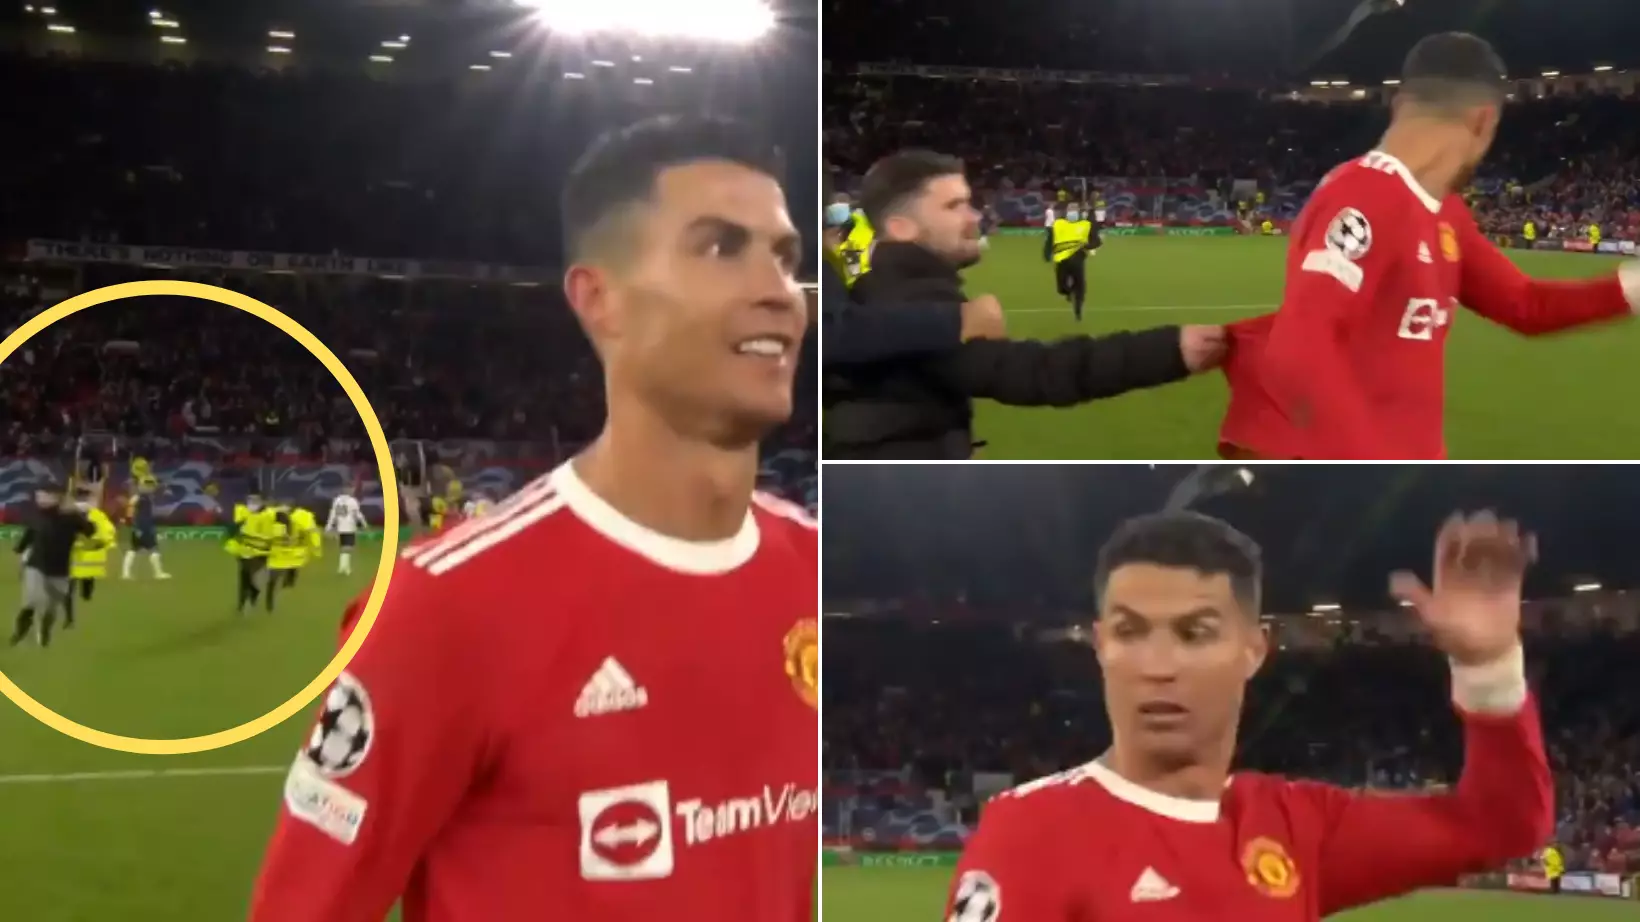 Crazed Fan Tries To Get Cristiano Ronaldo's Shirt, Steward Almost Takes Him Out In Bizarre Sequence 